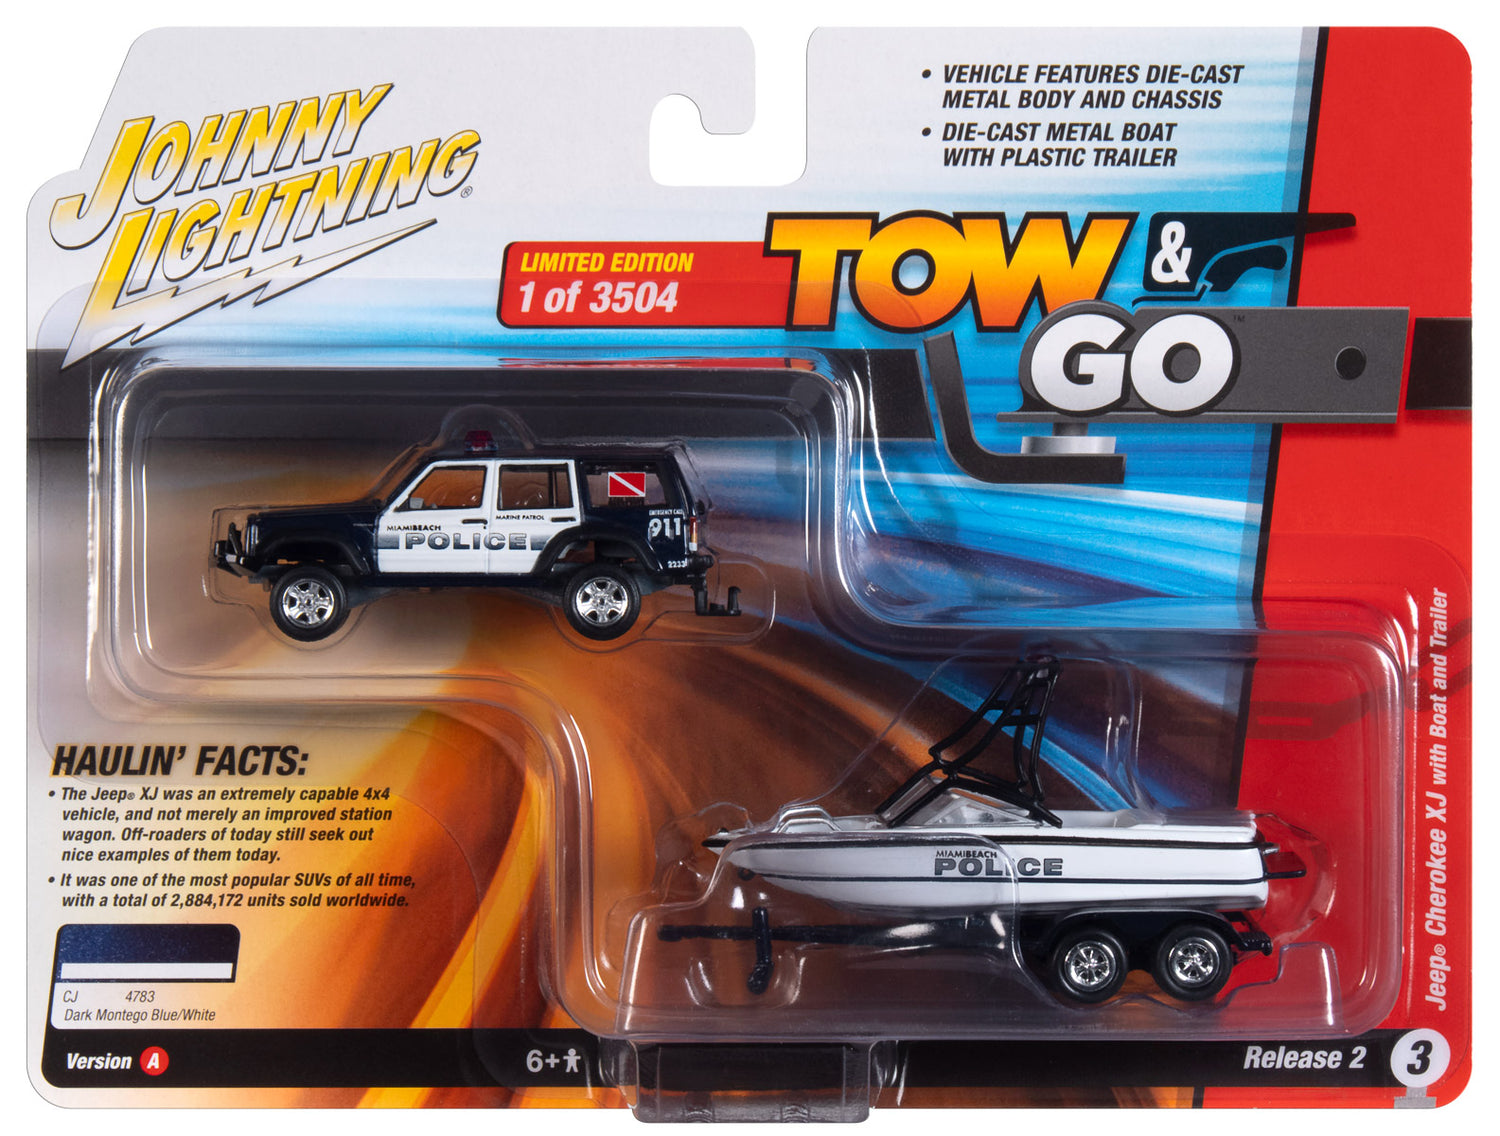 1981 Jeep Wagoneer Midnight Blue with Boat & Trailer Gone Fishing Limited  to 2508pc 1/64 Diecast by Johnny Lightning